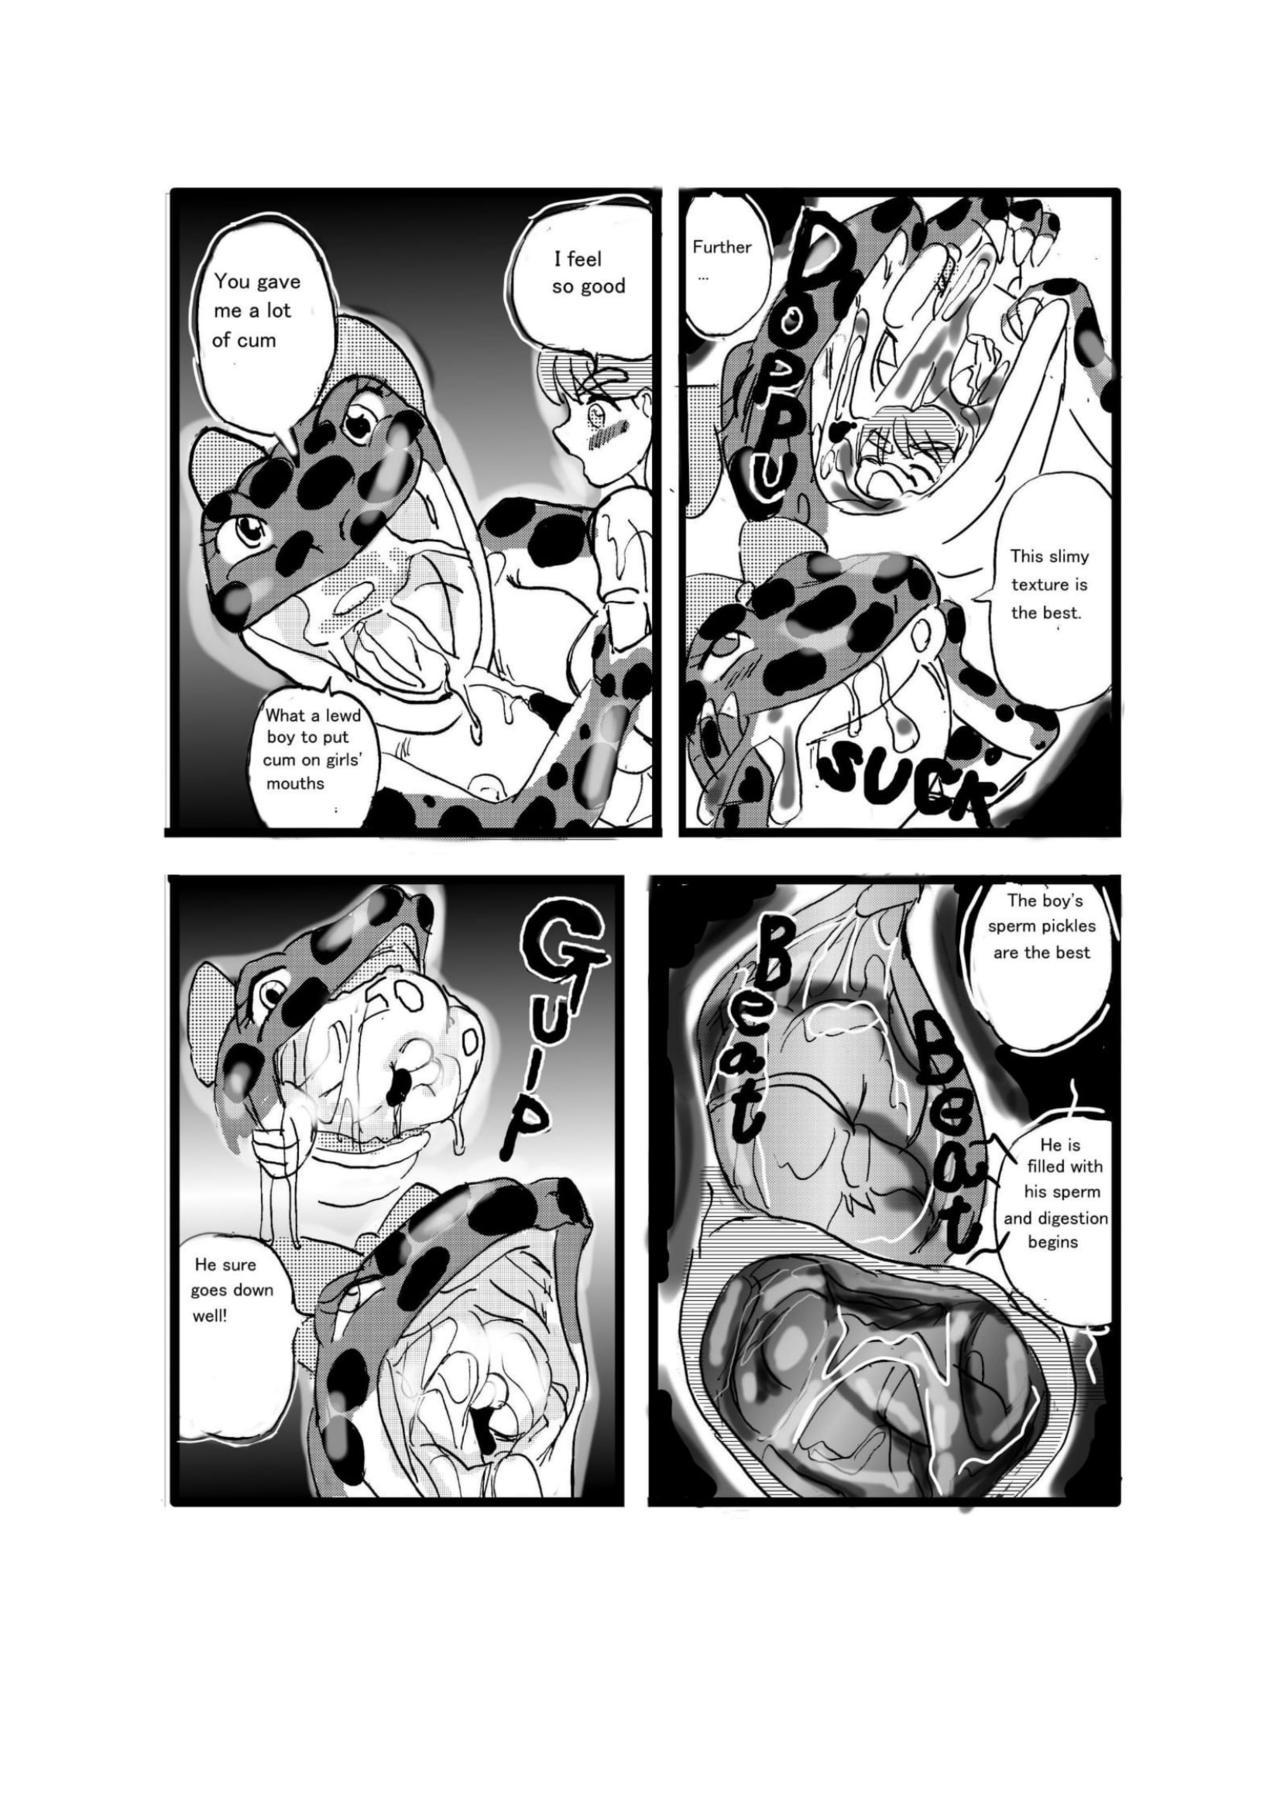 Ex Girlfriends Swallowed Whole vol.2 Waniko + What's Digestion? - Original Hot Wife - Page 8